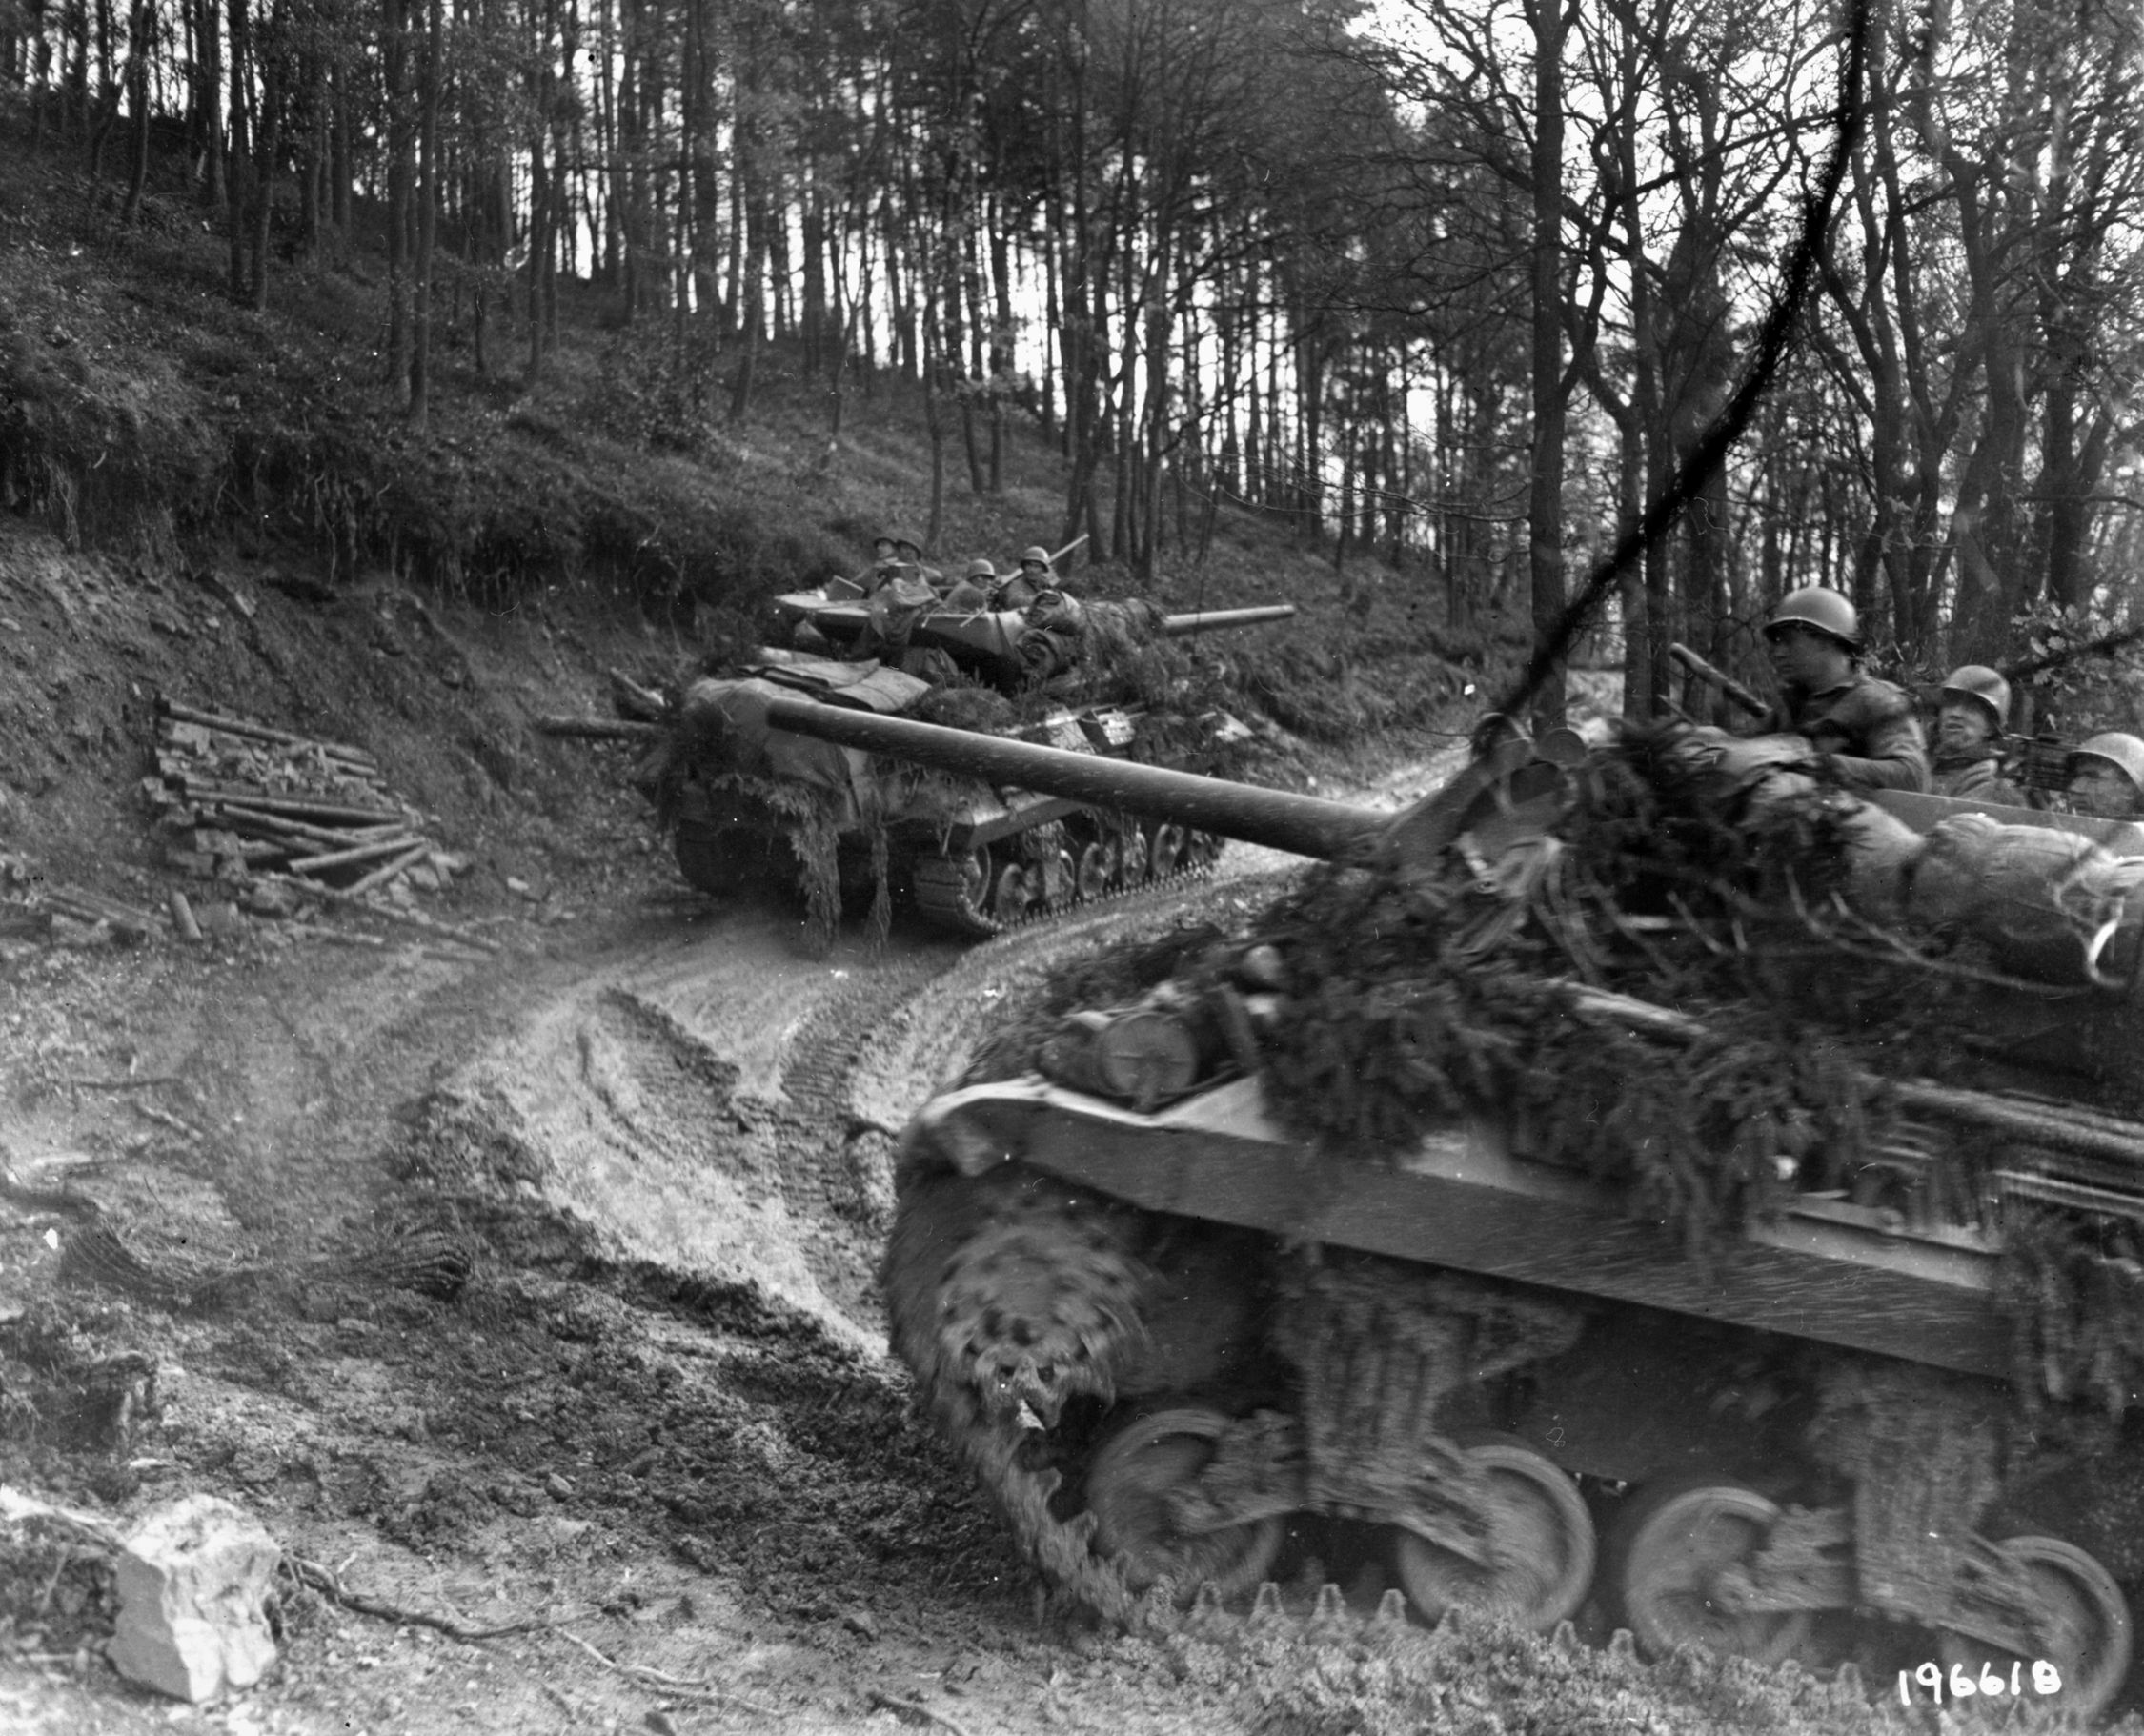 American tanks make their way cautiously up a narrow, muddy track in the Hürtgen Forest. The dense forest was difficult terrain for armor.